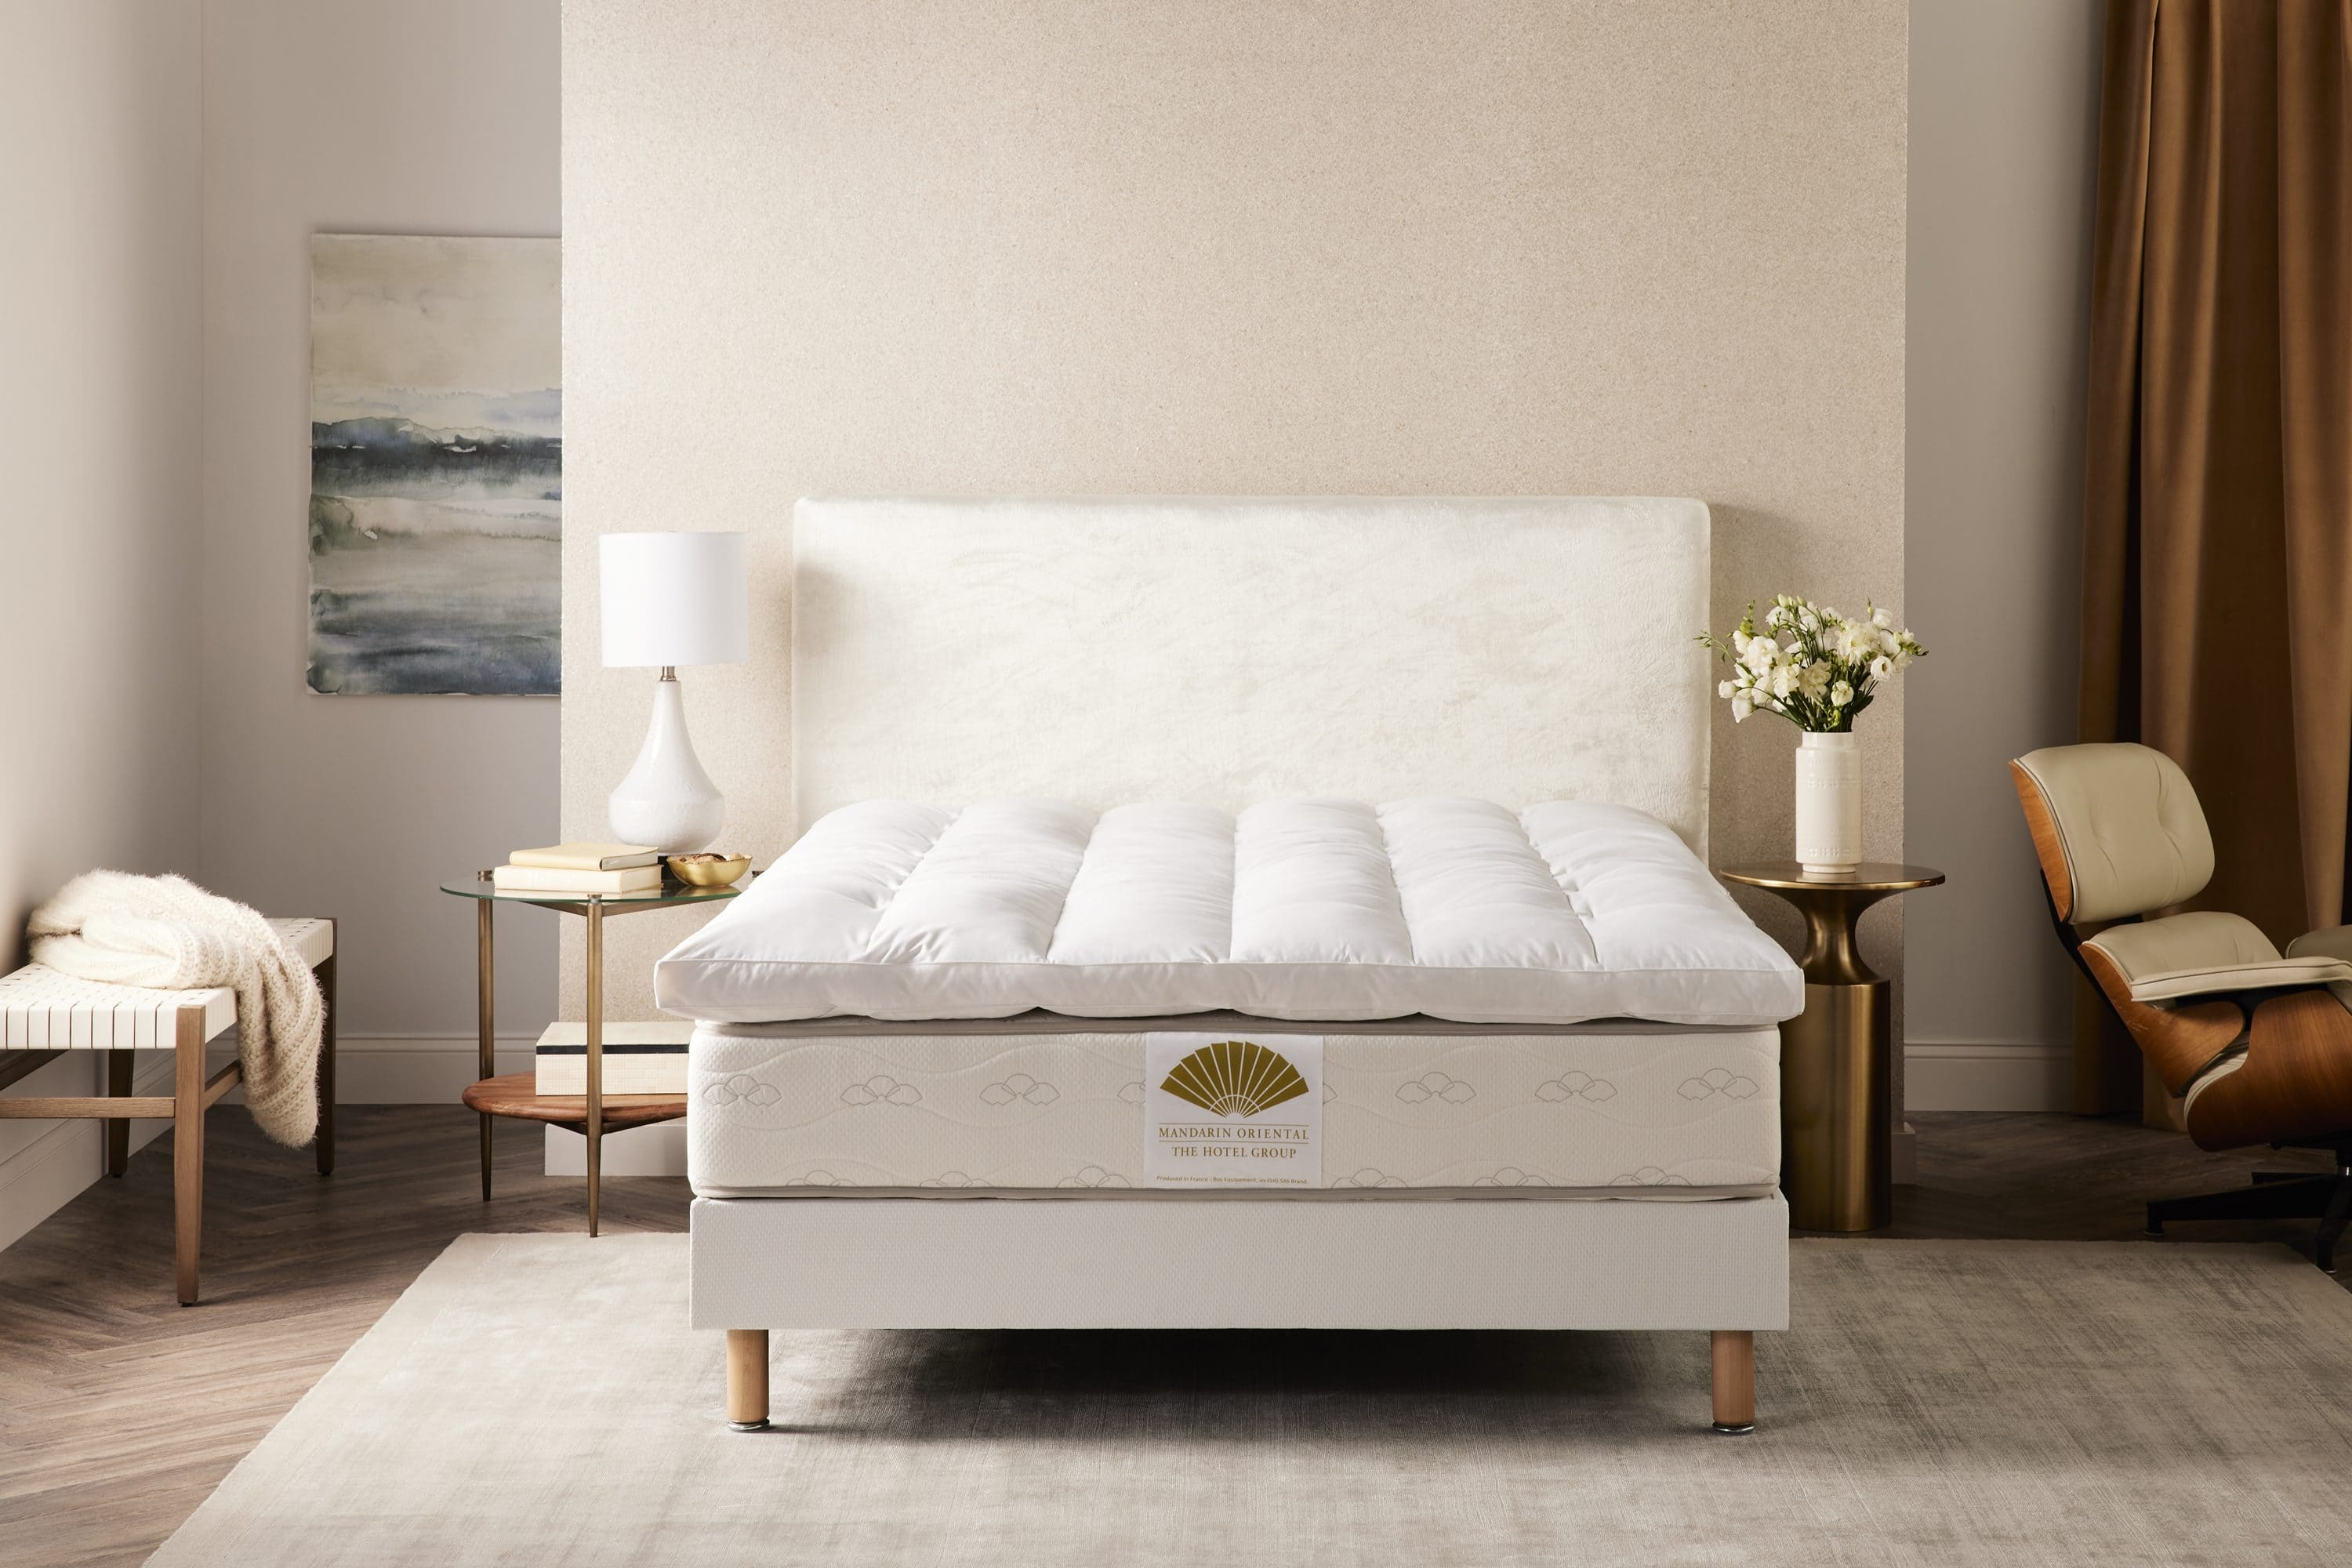 Goose featherbed mattress topper